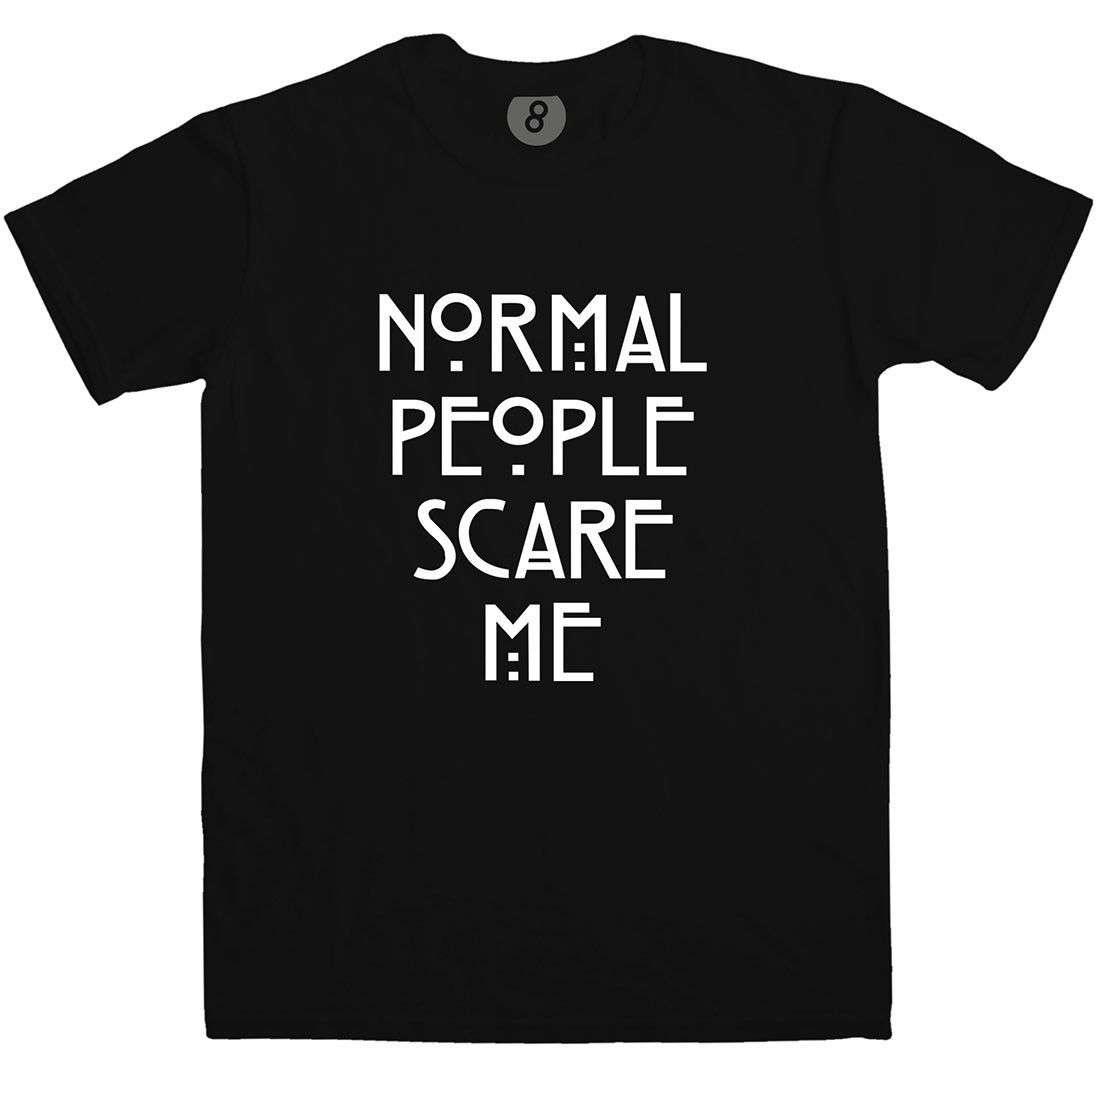 Normal People Scare Me T-Shirt For Men 8Ball